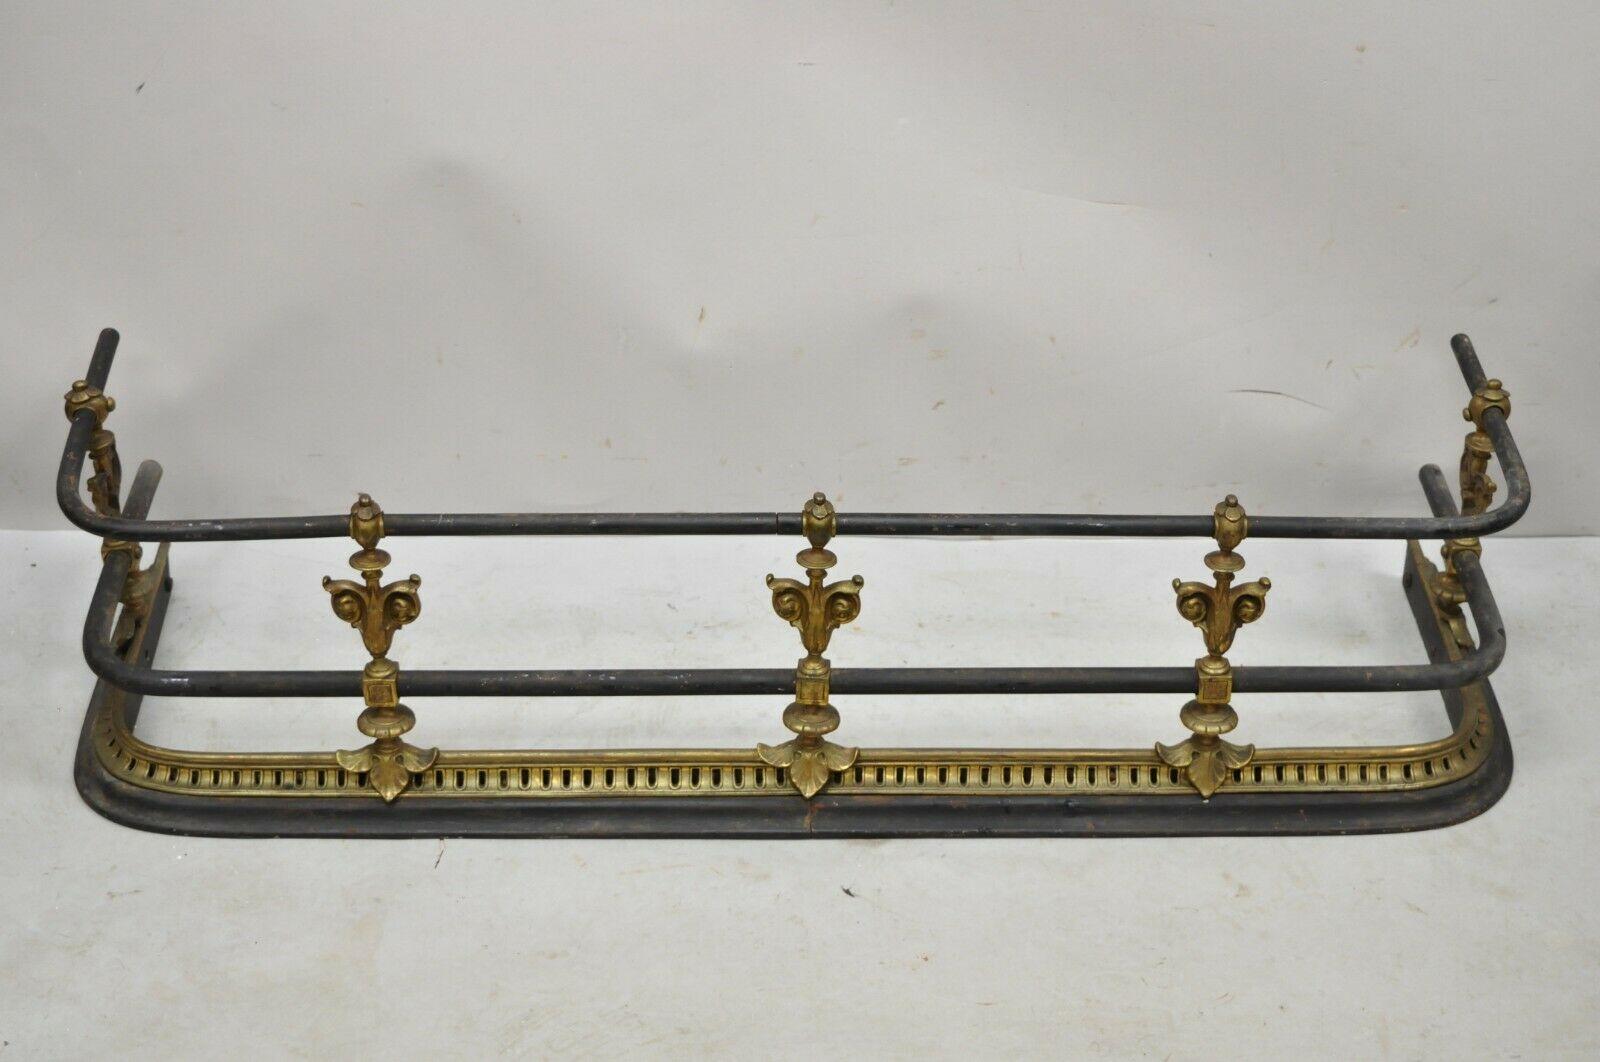 Antique English Victorian brass cast iron leaf scroll fireplace surround fender. item features wonderful aged patina, very nice antique item, quality craftsmanship, great style and form. Circa 19th Century. Measurements: 10.5